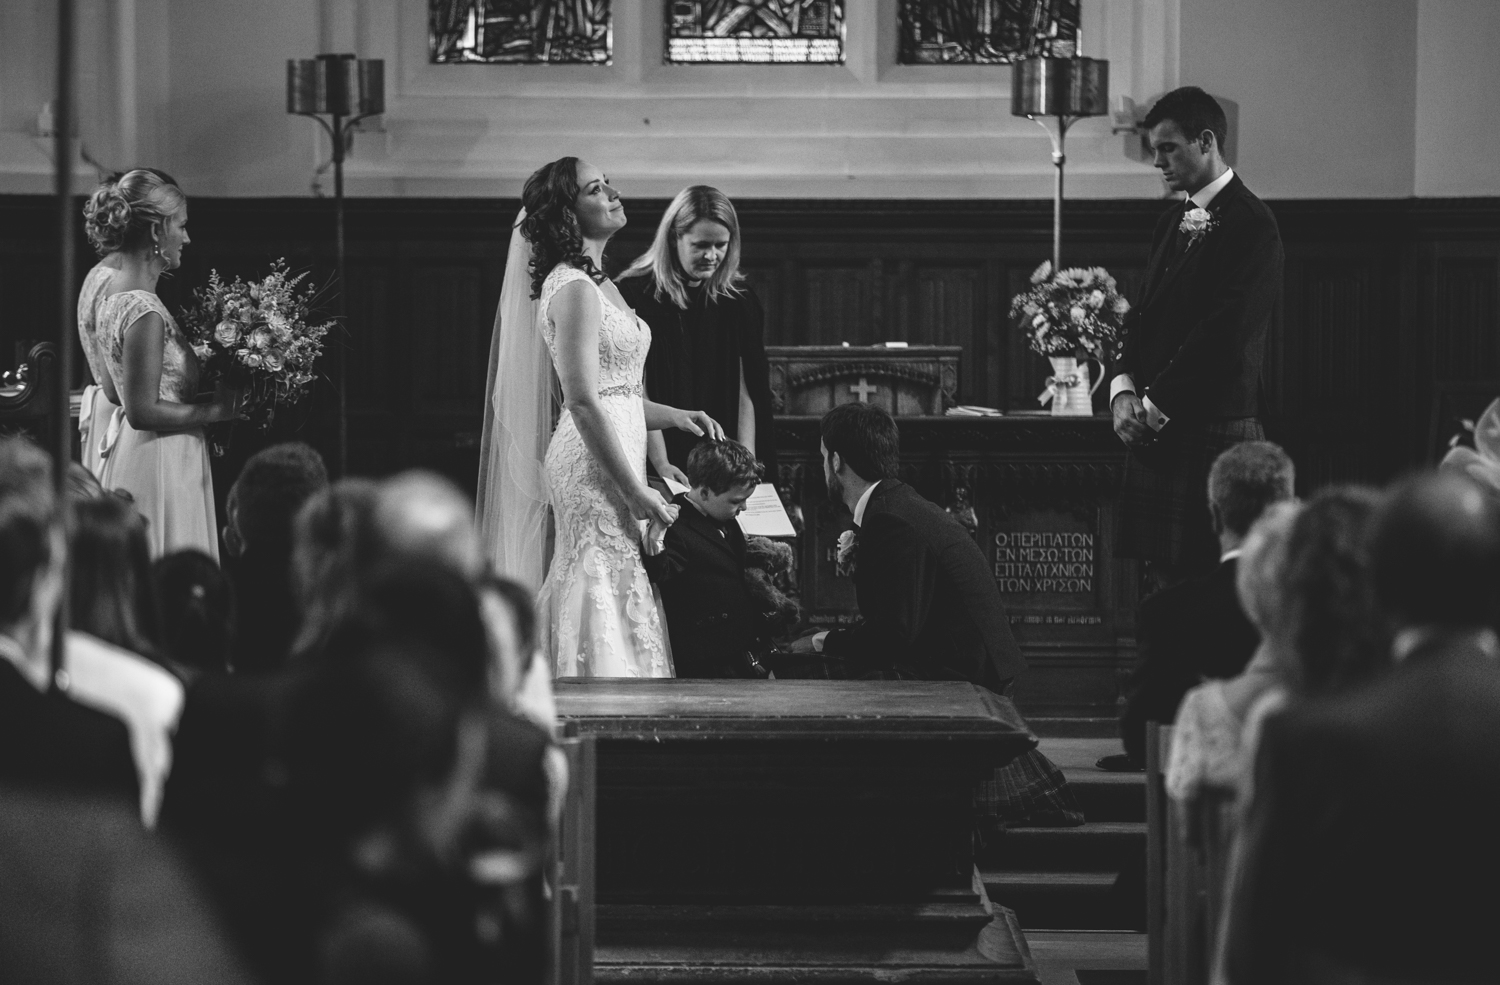 getting married in aberdeen, getting married at kings college, aberdeen wedding photography, wedding photographers in aberdeen, wedding at kings college chapel